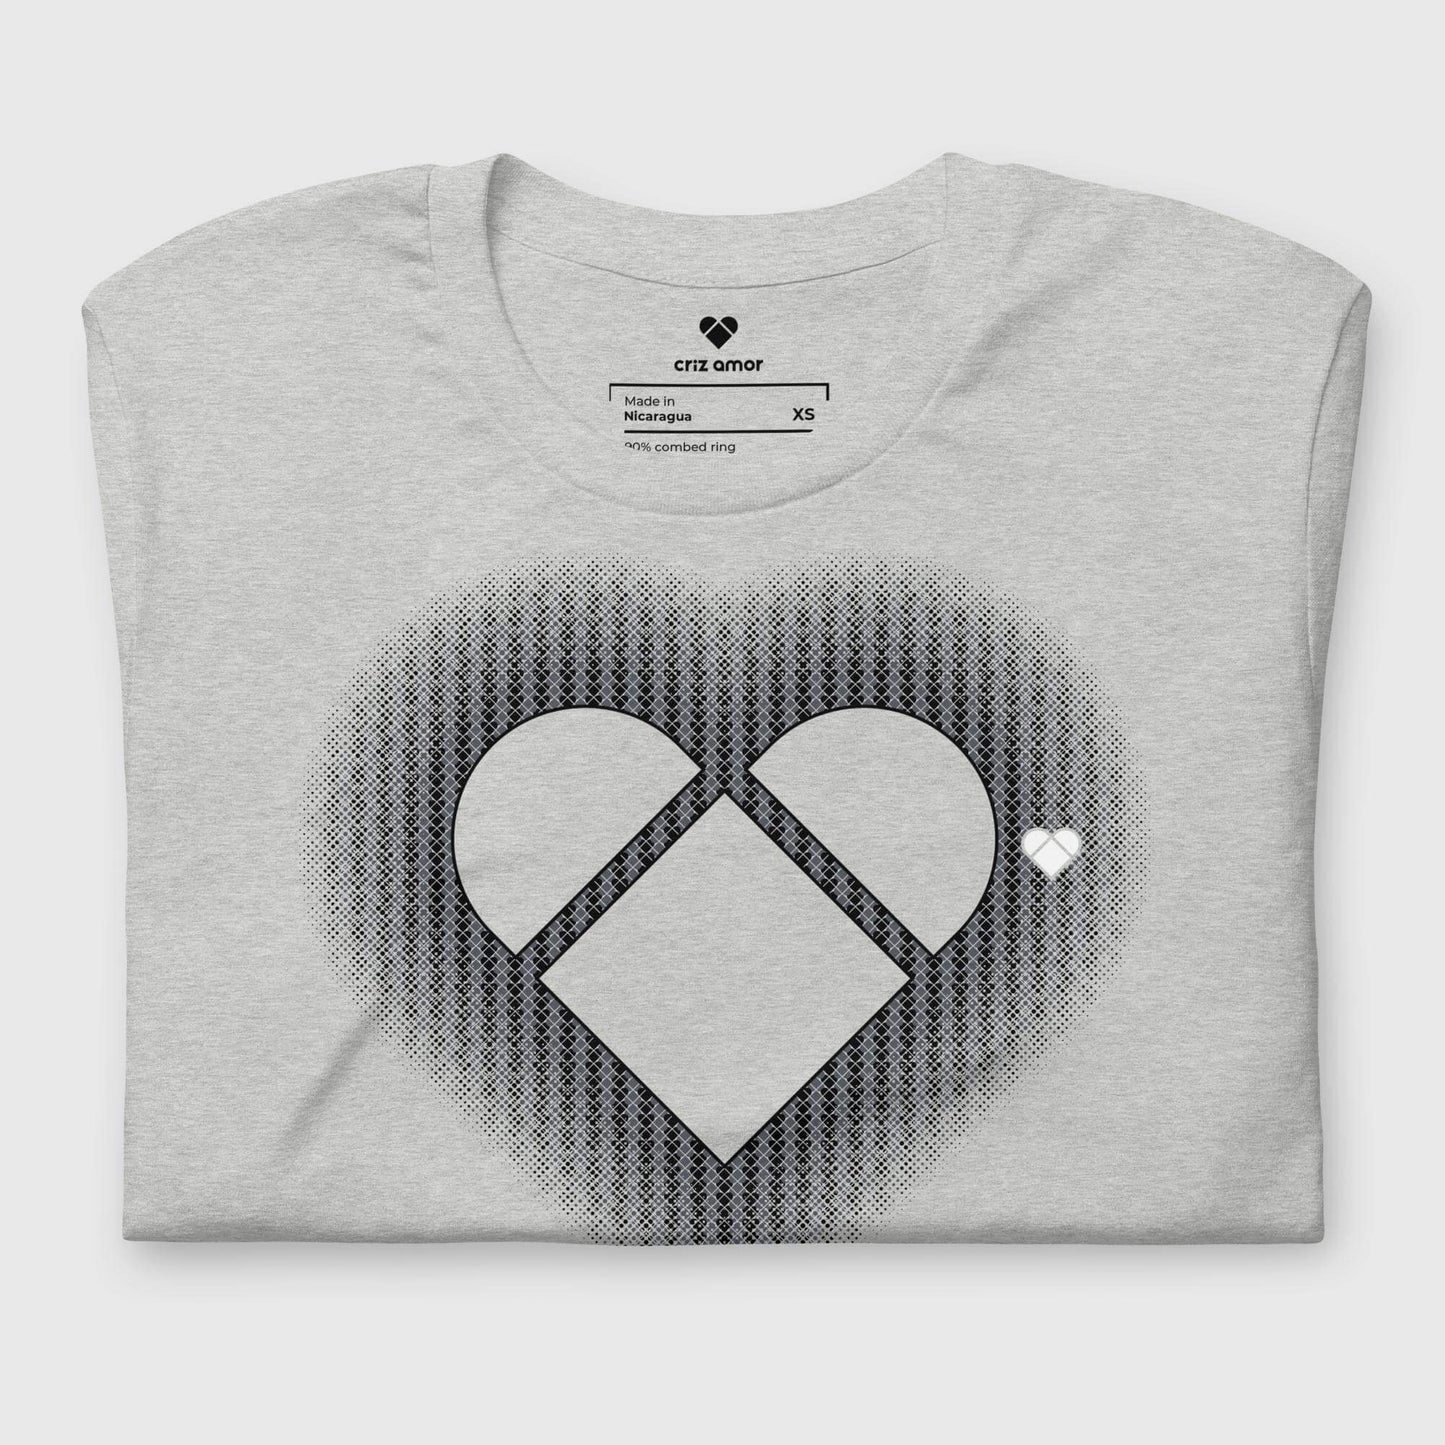 folded Designer genderless gray tee - part of the Amor Primero collection